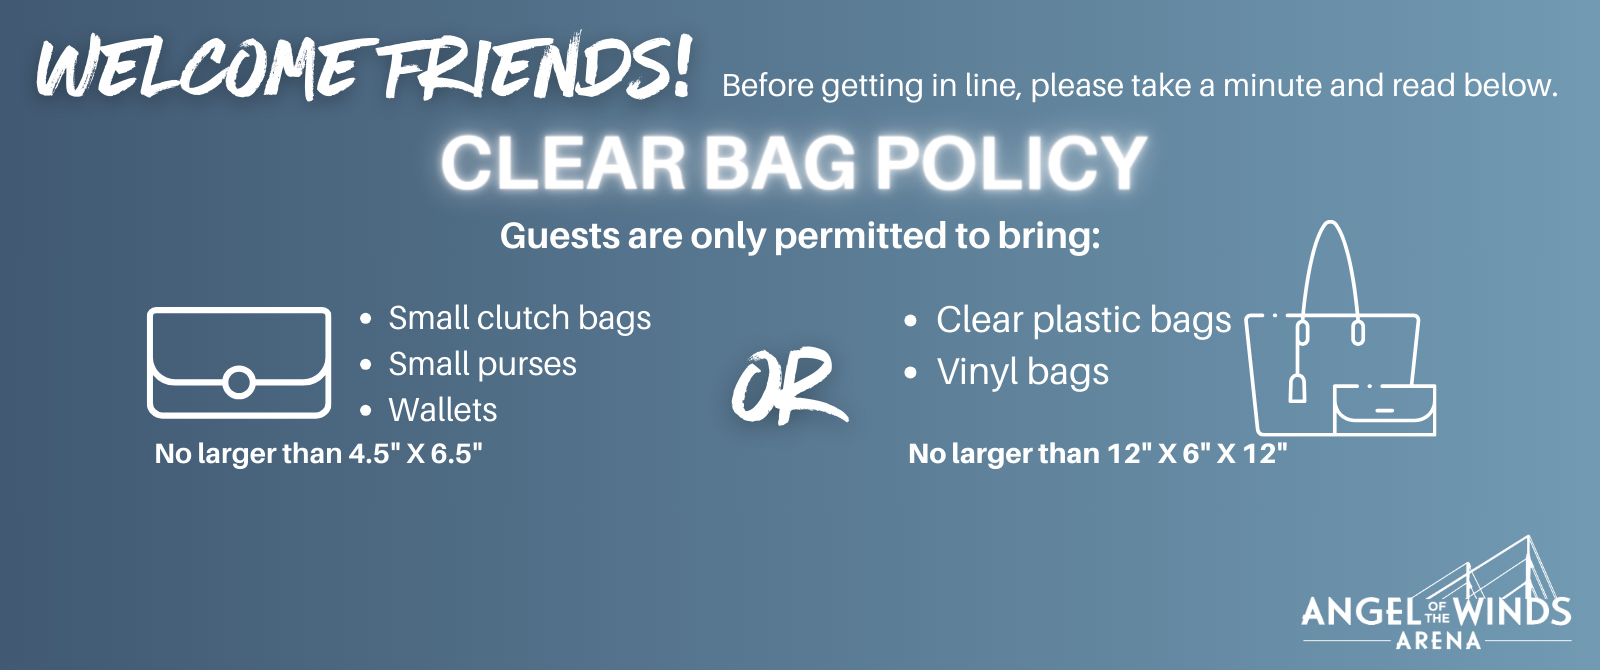 Welcome Friends! Before getting in line, please take a minute and read the Angel of the Winds Arena clear bag policyabove.